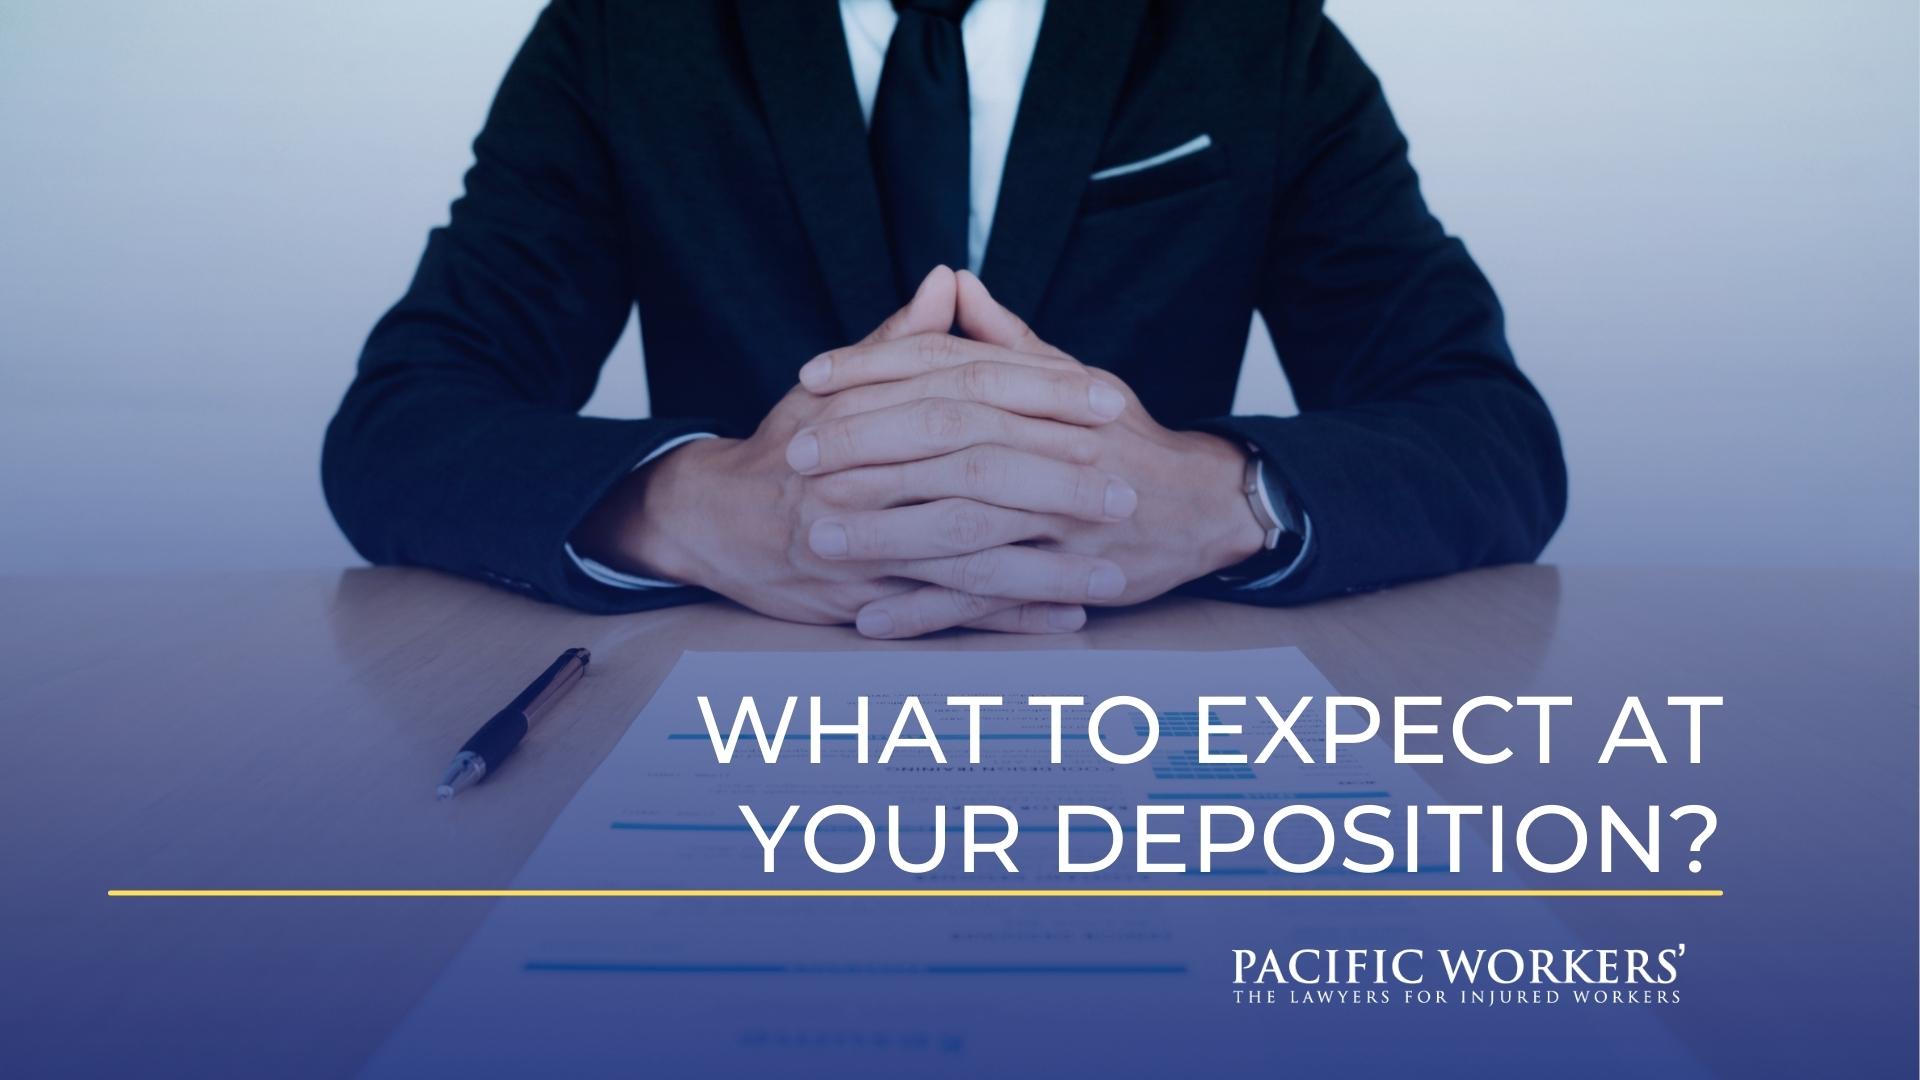 What to Expect at Your Deposition?